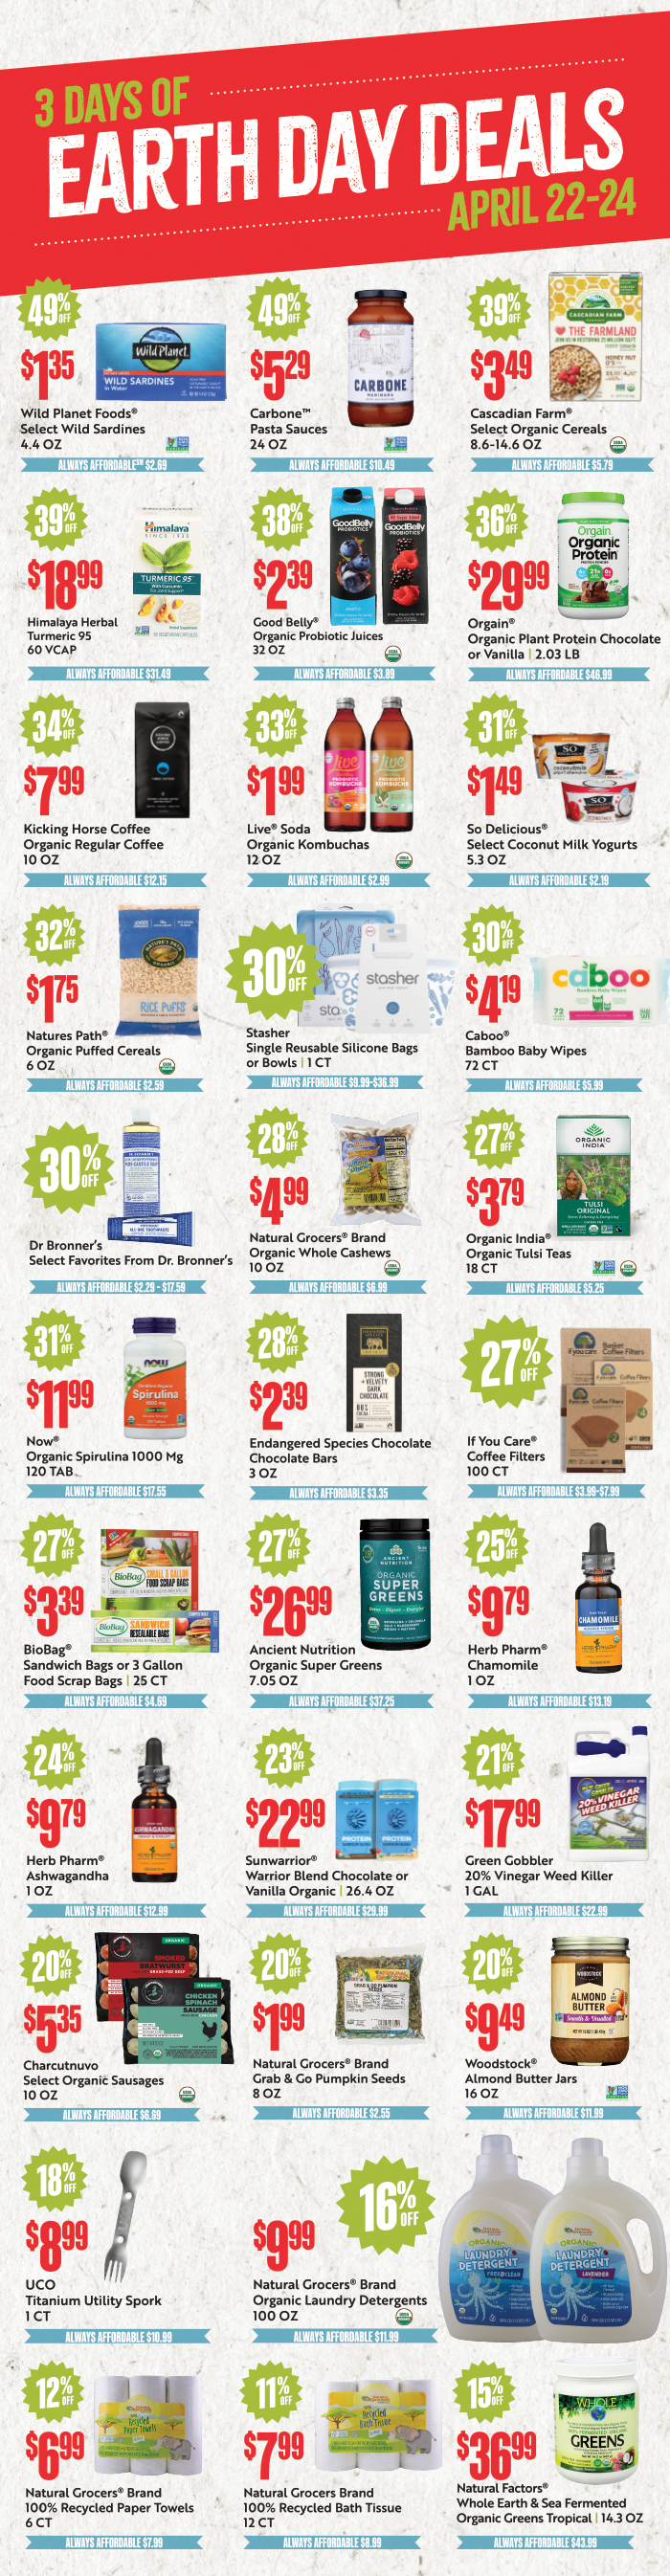 Earth Day Deals 04/22 - 04/24